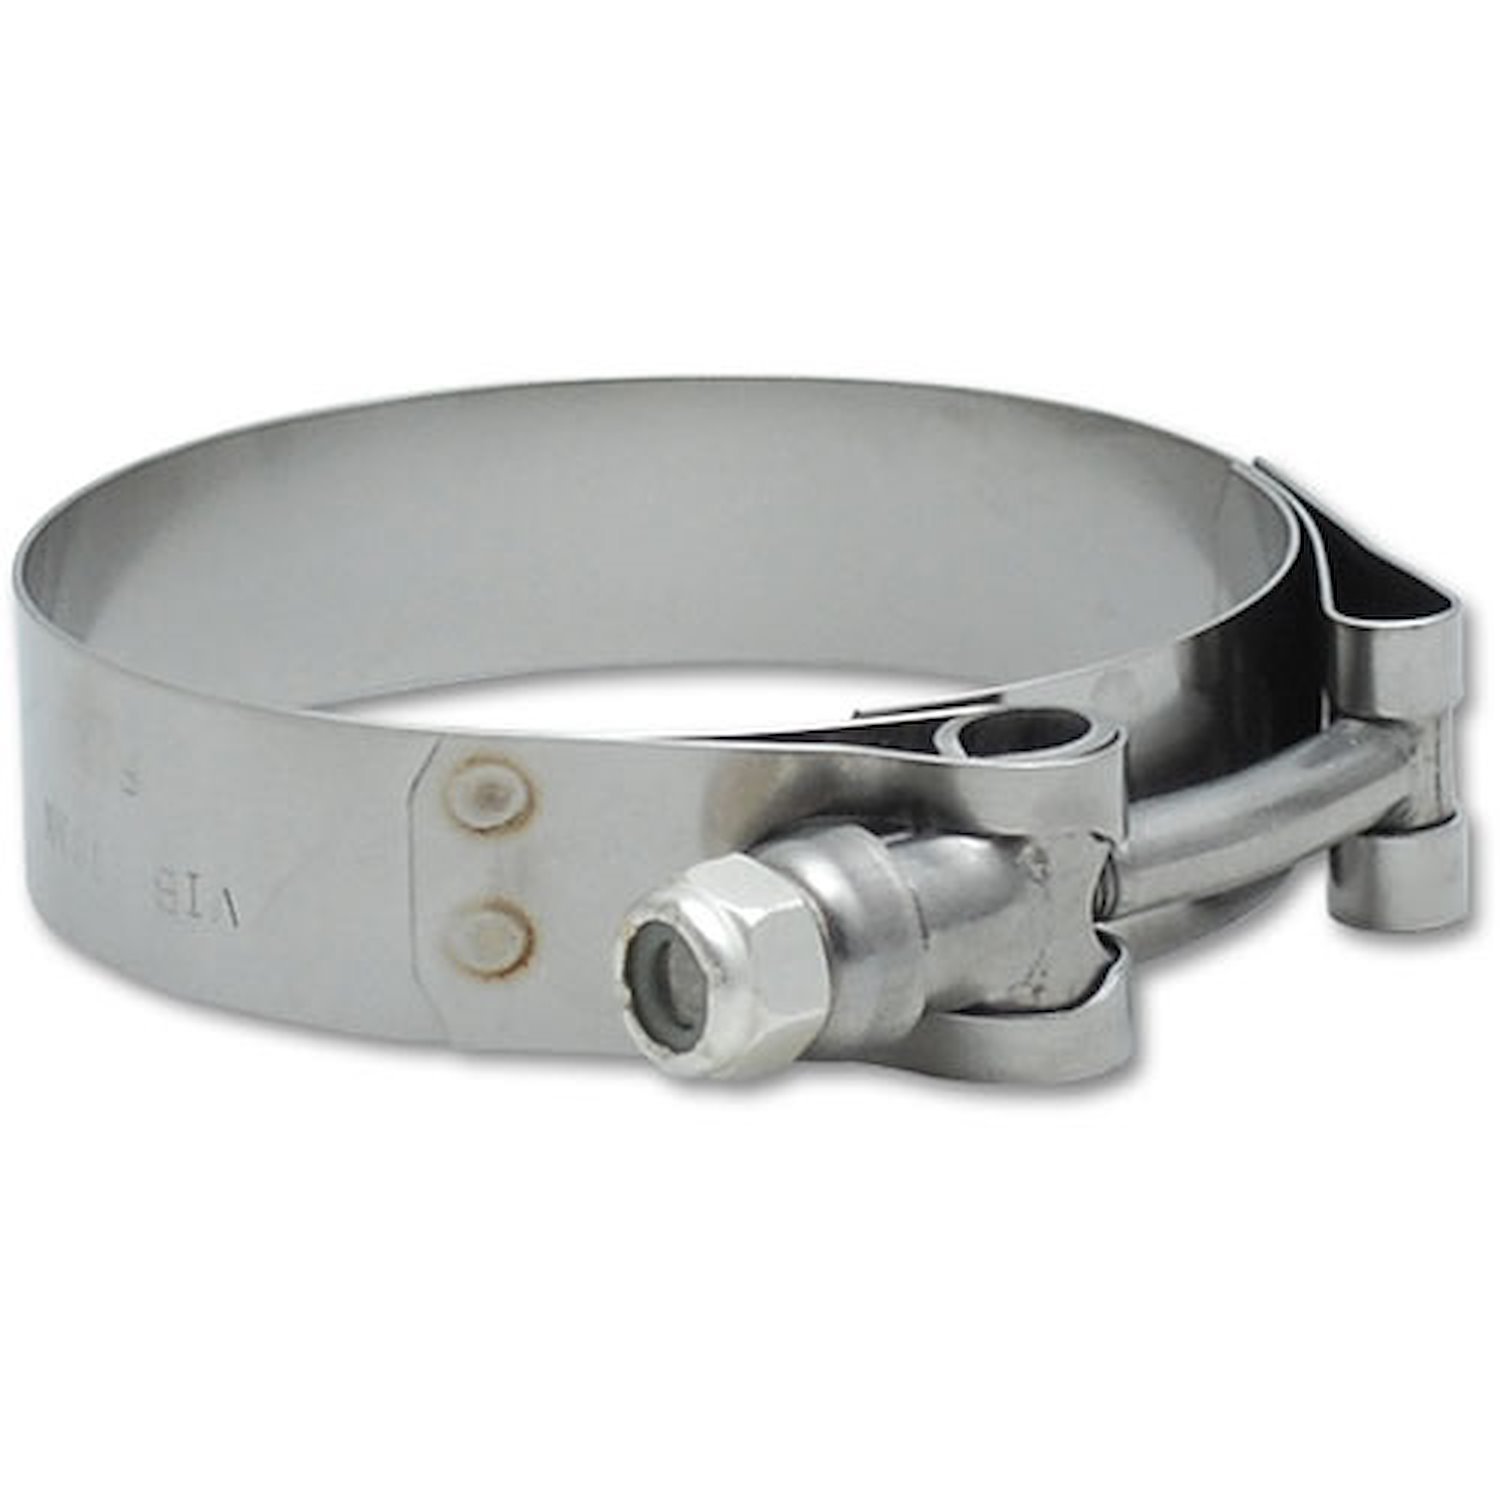 Stainless Steel T-Bolt Clamps Clamp Range 1.49" - 1.84"